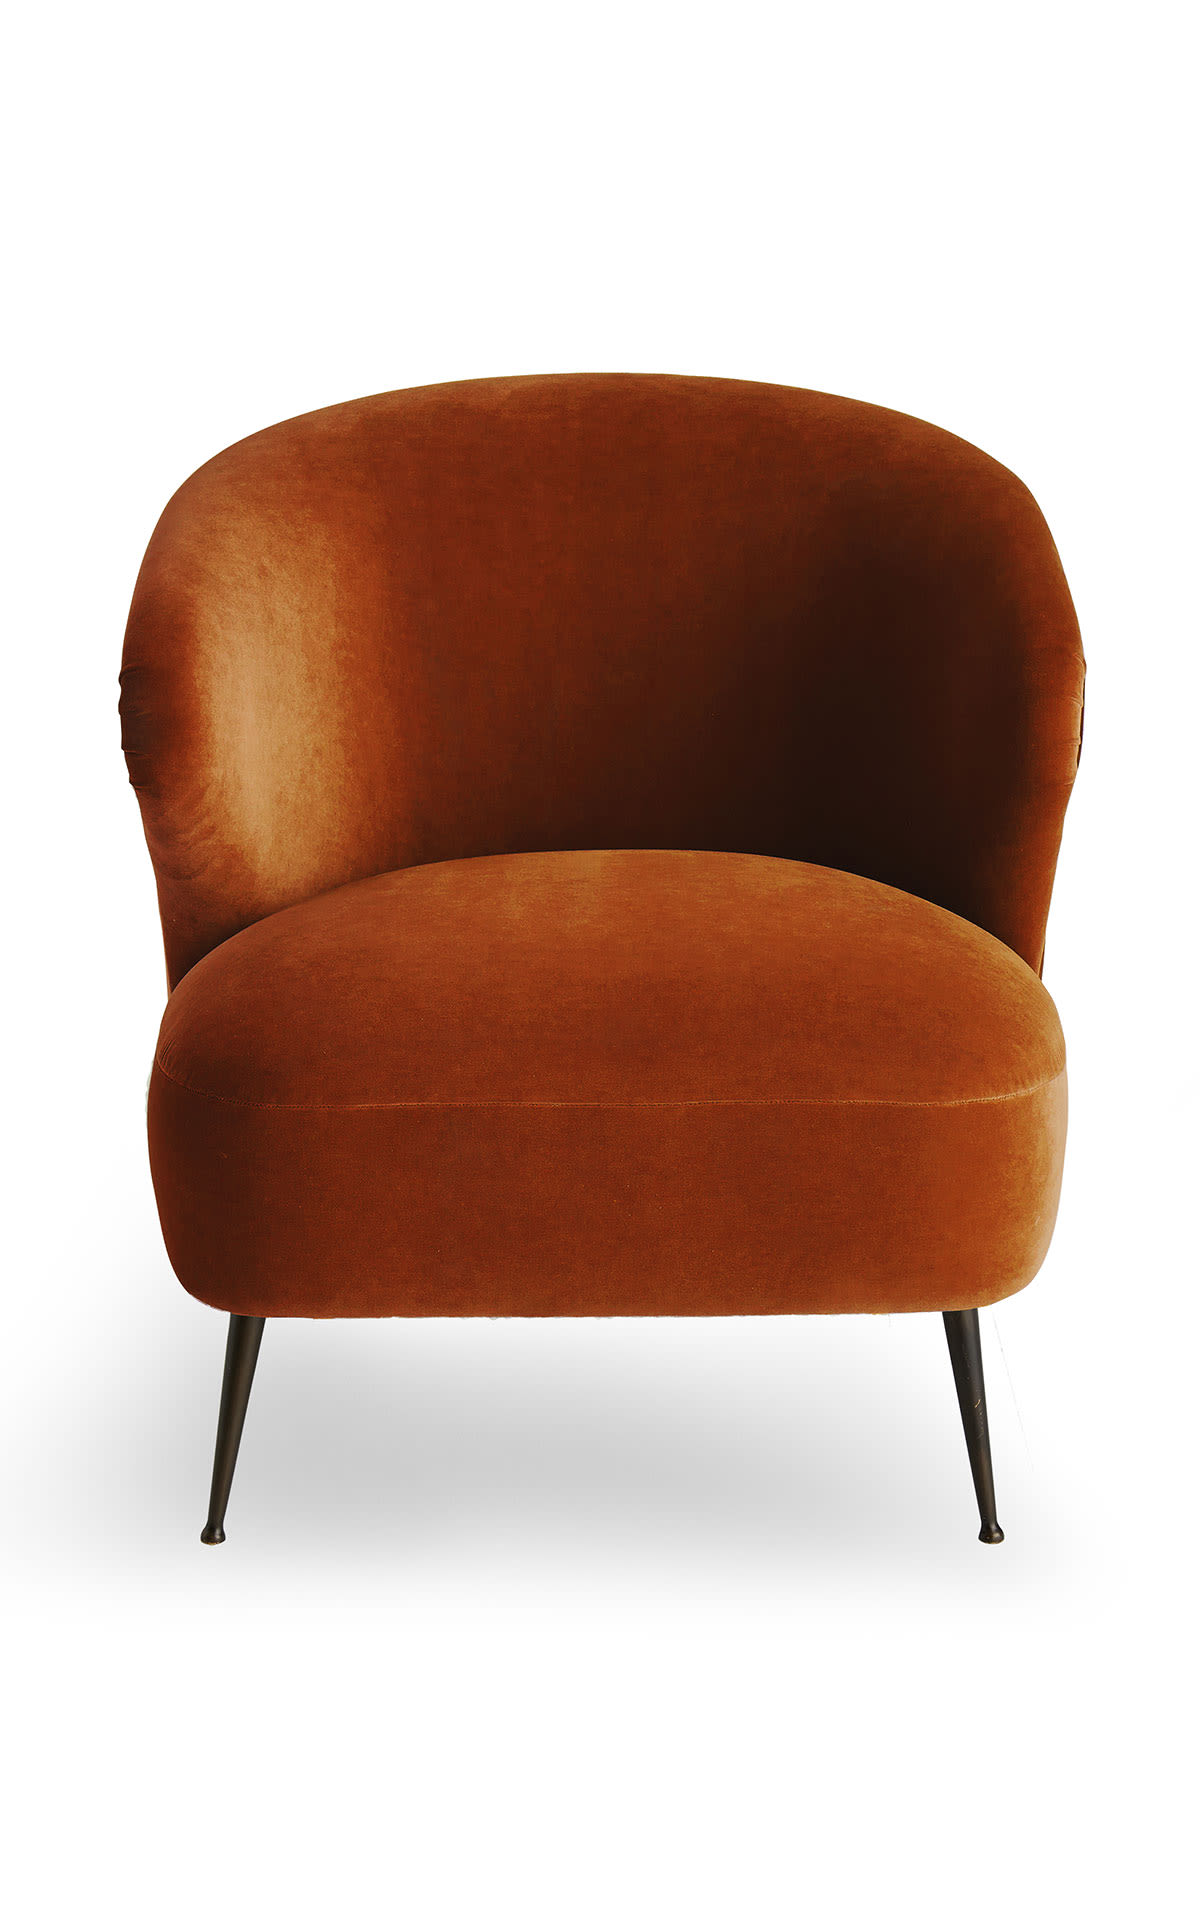 Soho Home Jeanne armchair  from Bicester Village